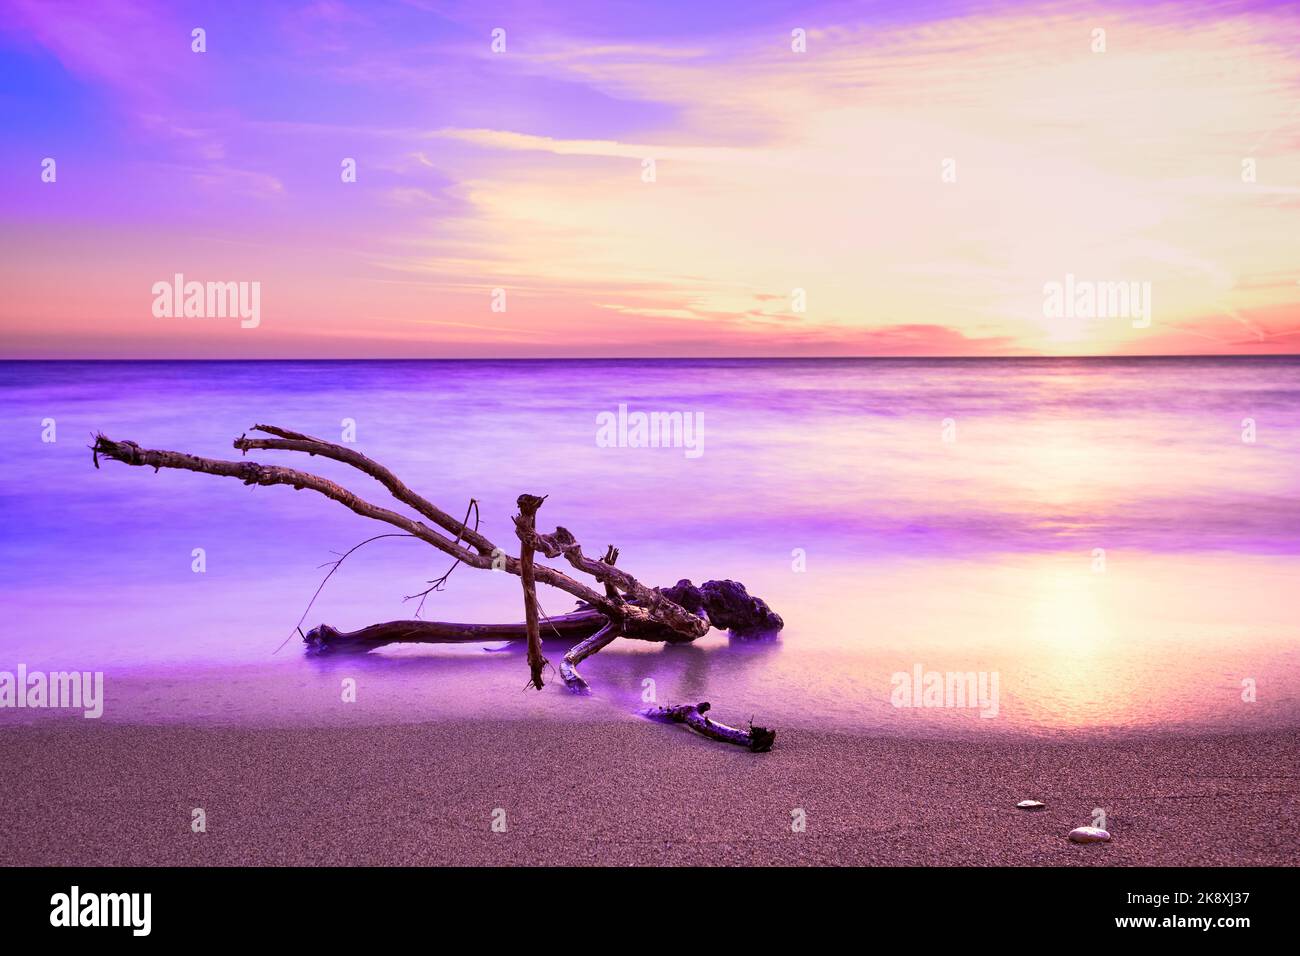 Sunset on sandy beach, piece of driftwood washed by tidal waves. Color-graded image in violet and pink colors Stock Photo